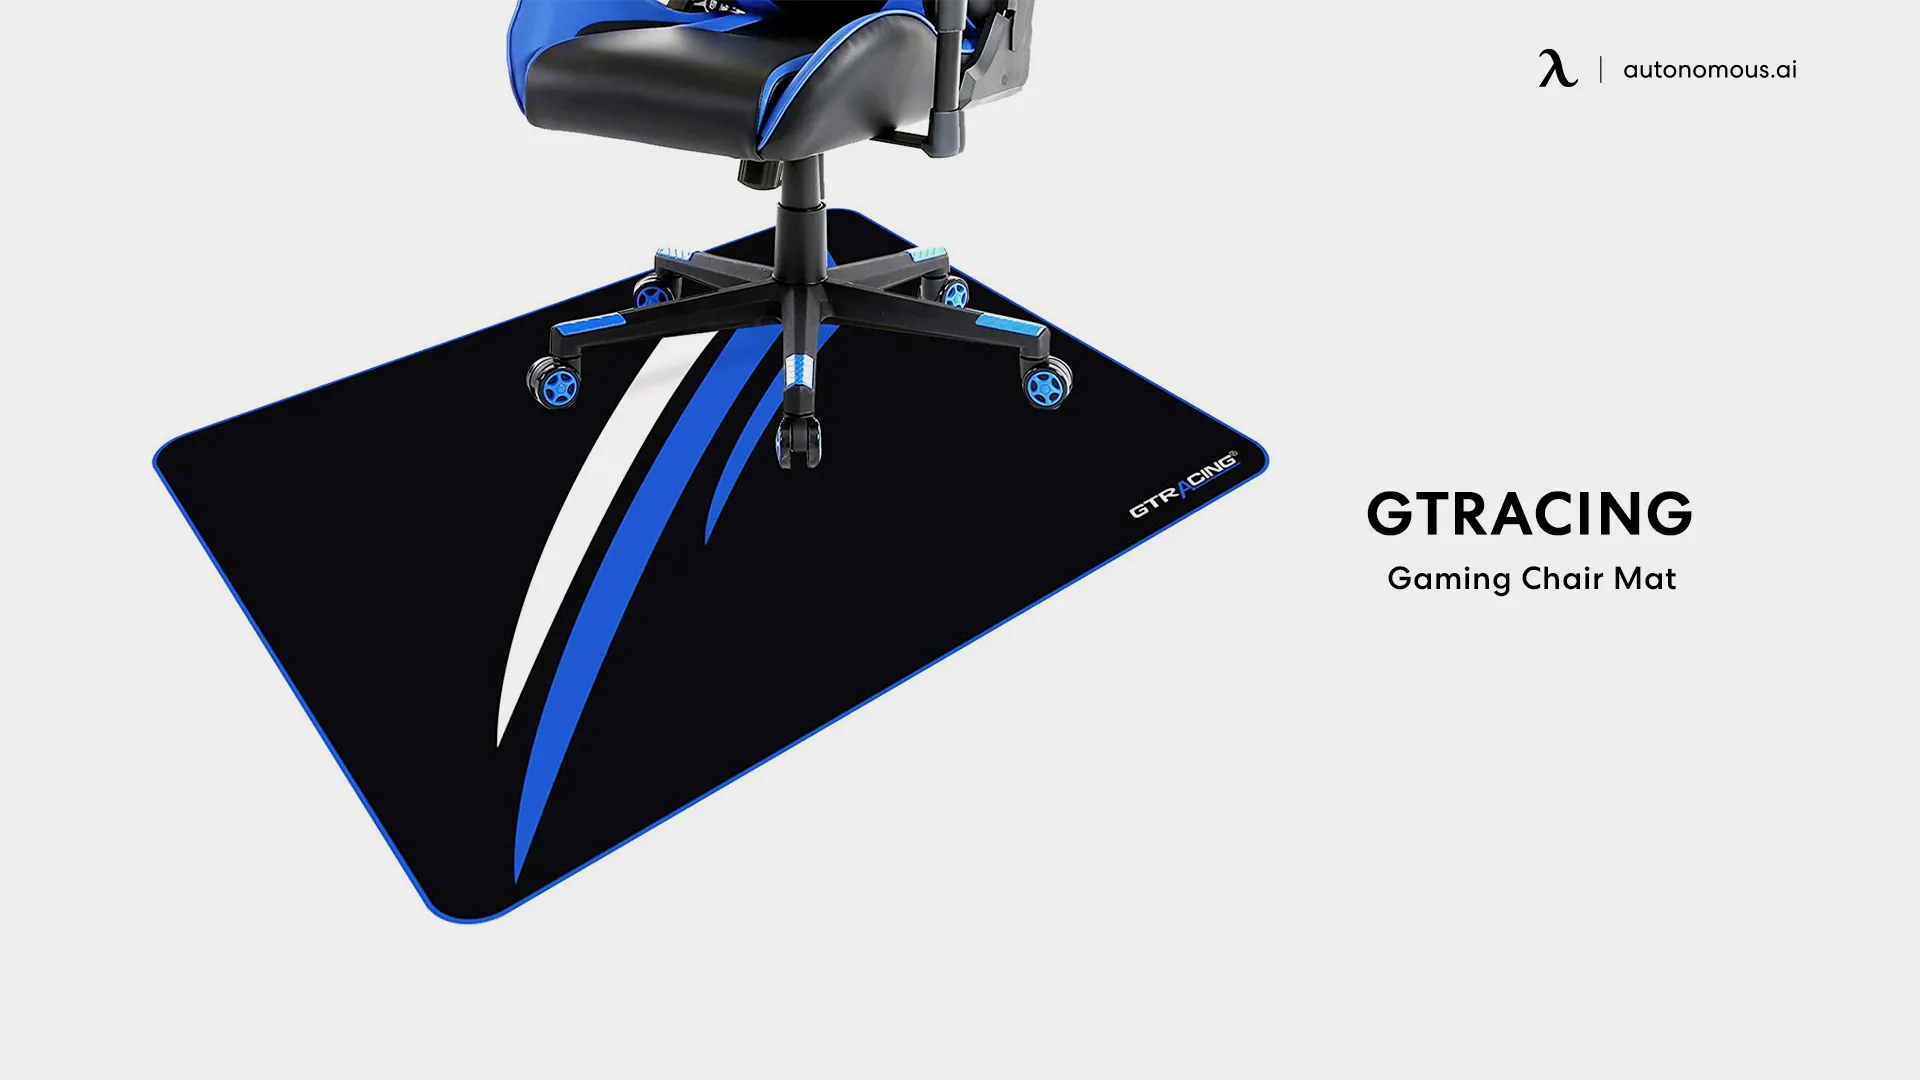 Gaming Chair Mat from GTRACING